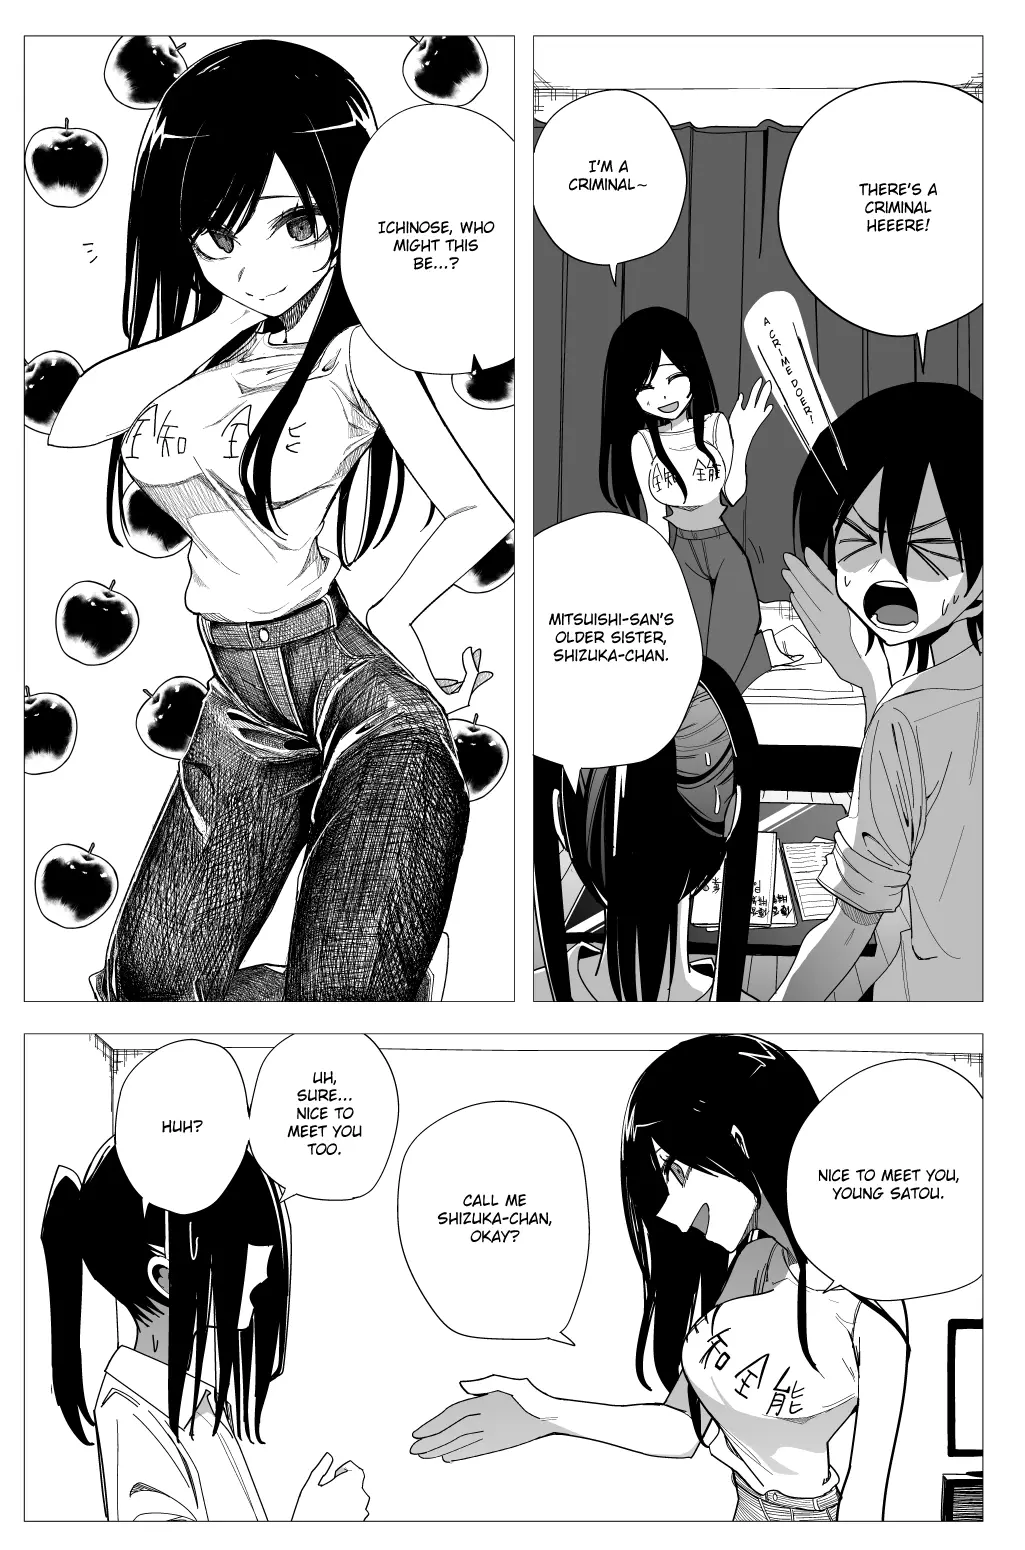 Mitsuishi-San Is Being Weird This Year - 27 page 8-32ee9529